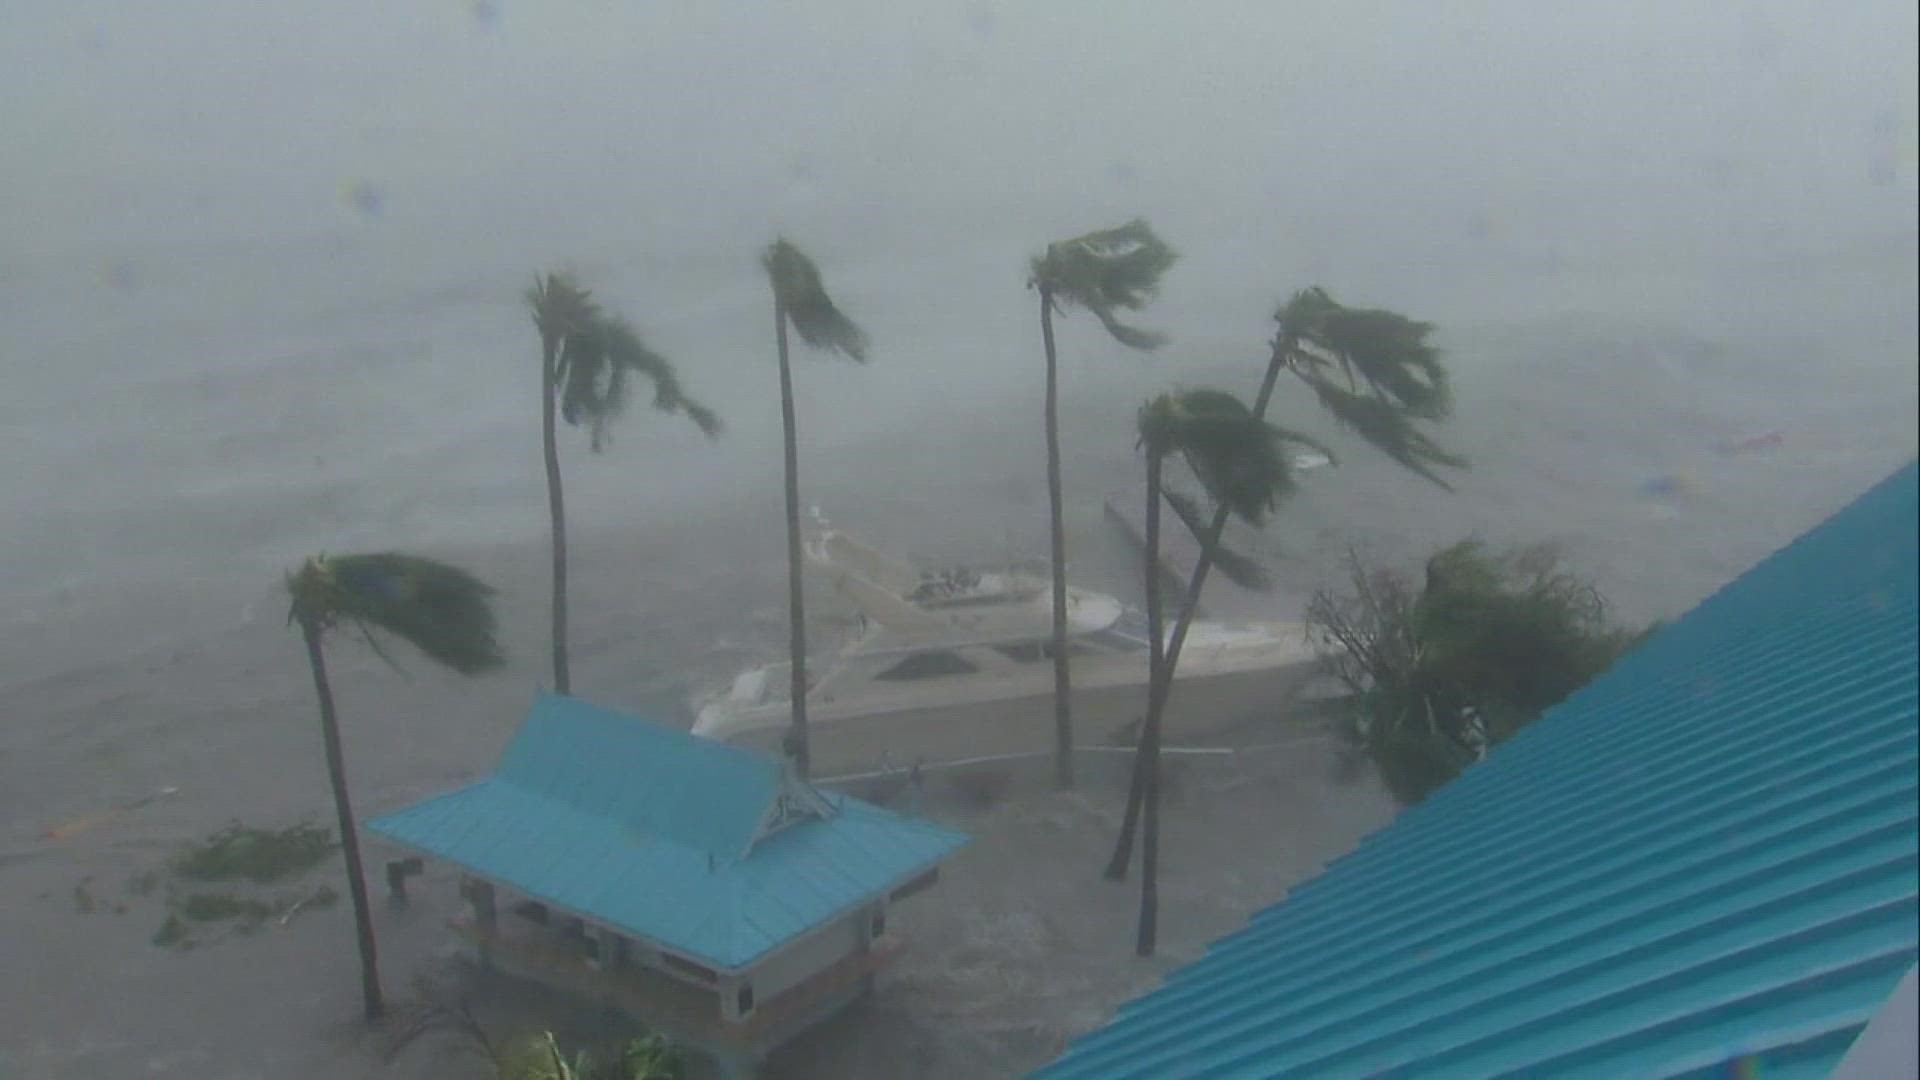 Latest on the conditions in southwestern Florida after Hurricane Ian directly hit the area as a Category 4 storm.